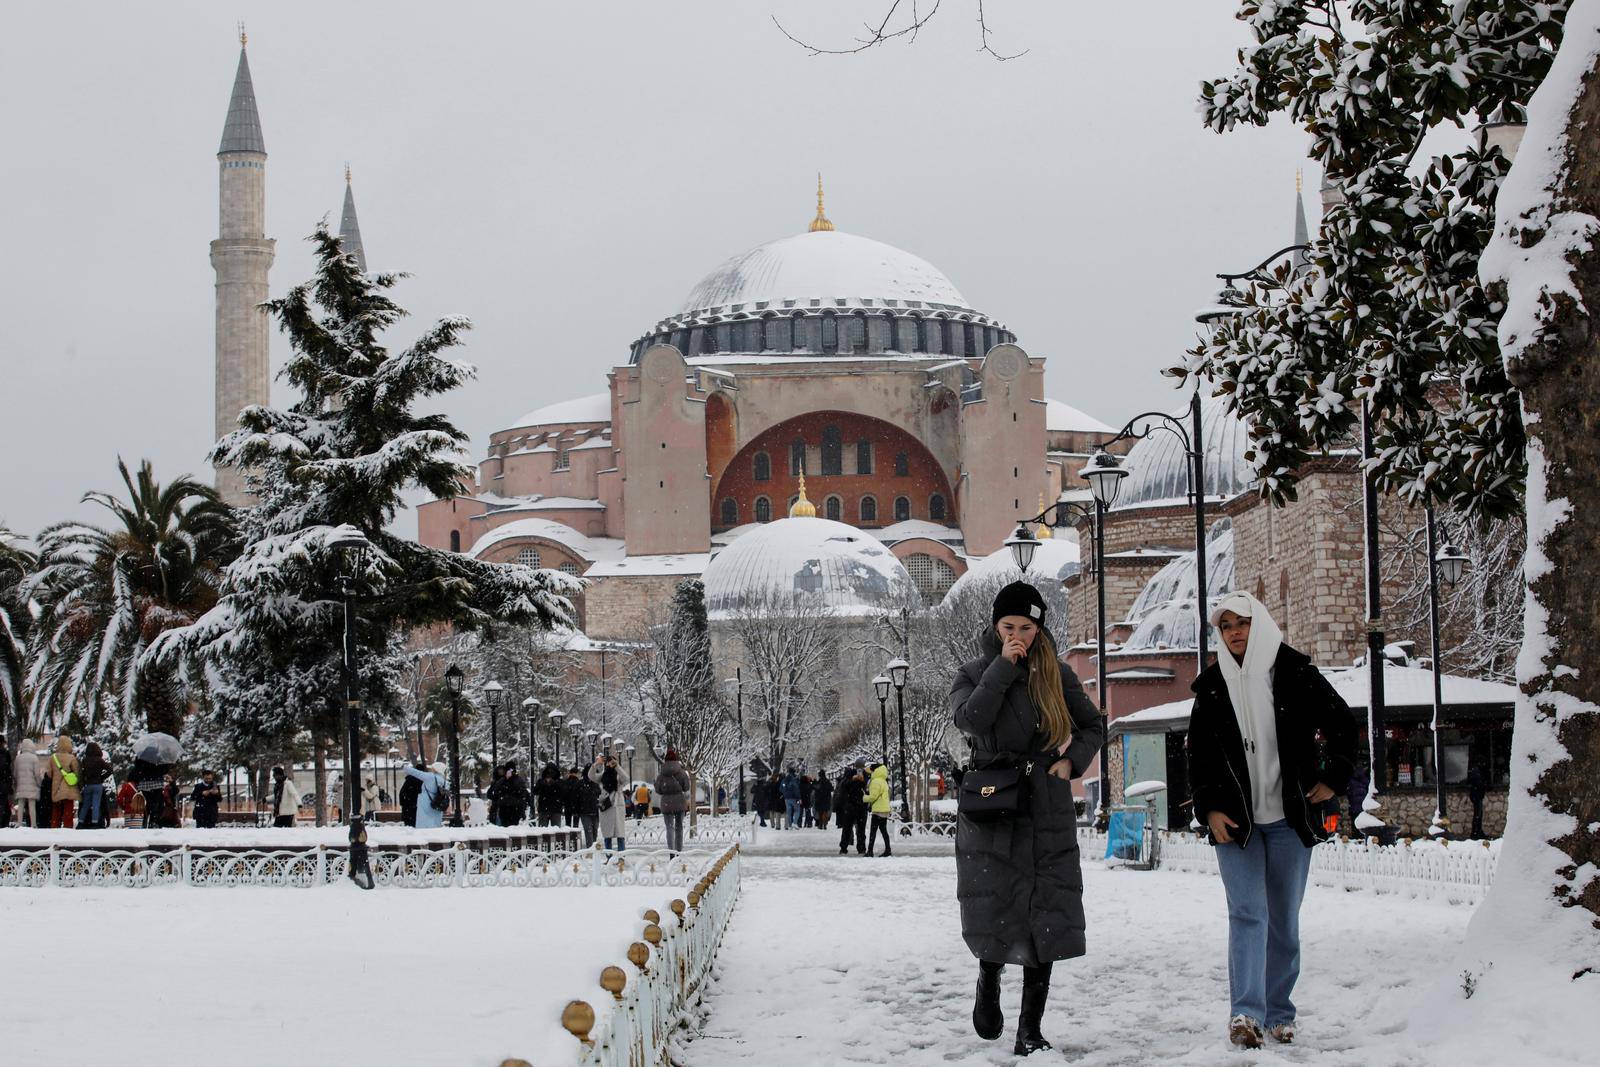 Tourists walk along Sultanahmet Square as Ayasofya-i Kebir Camii or Hagia Sophia Grand Mosque is seen in the background during a snowy day in Istanbul